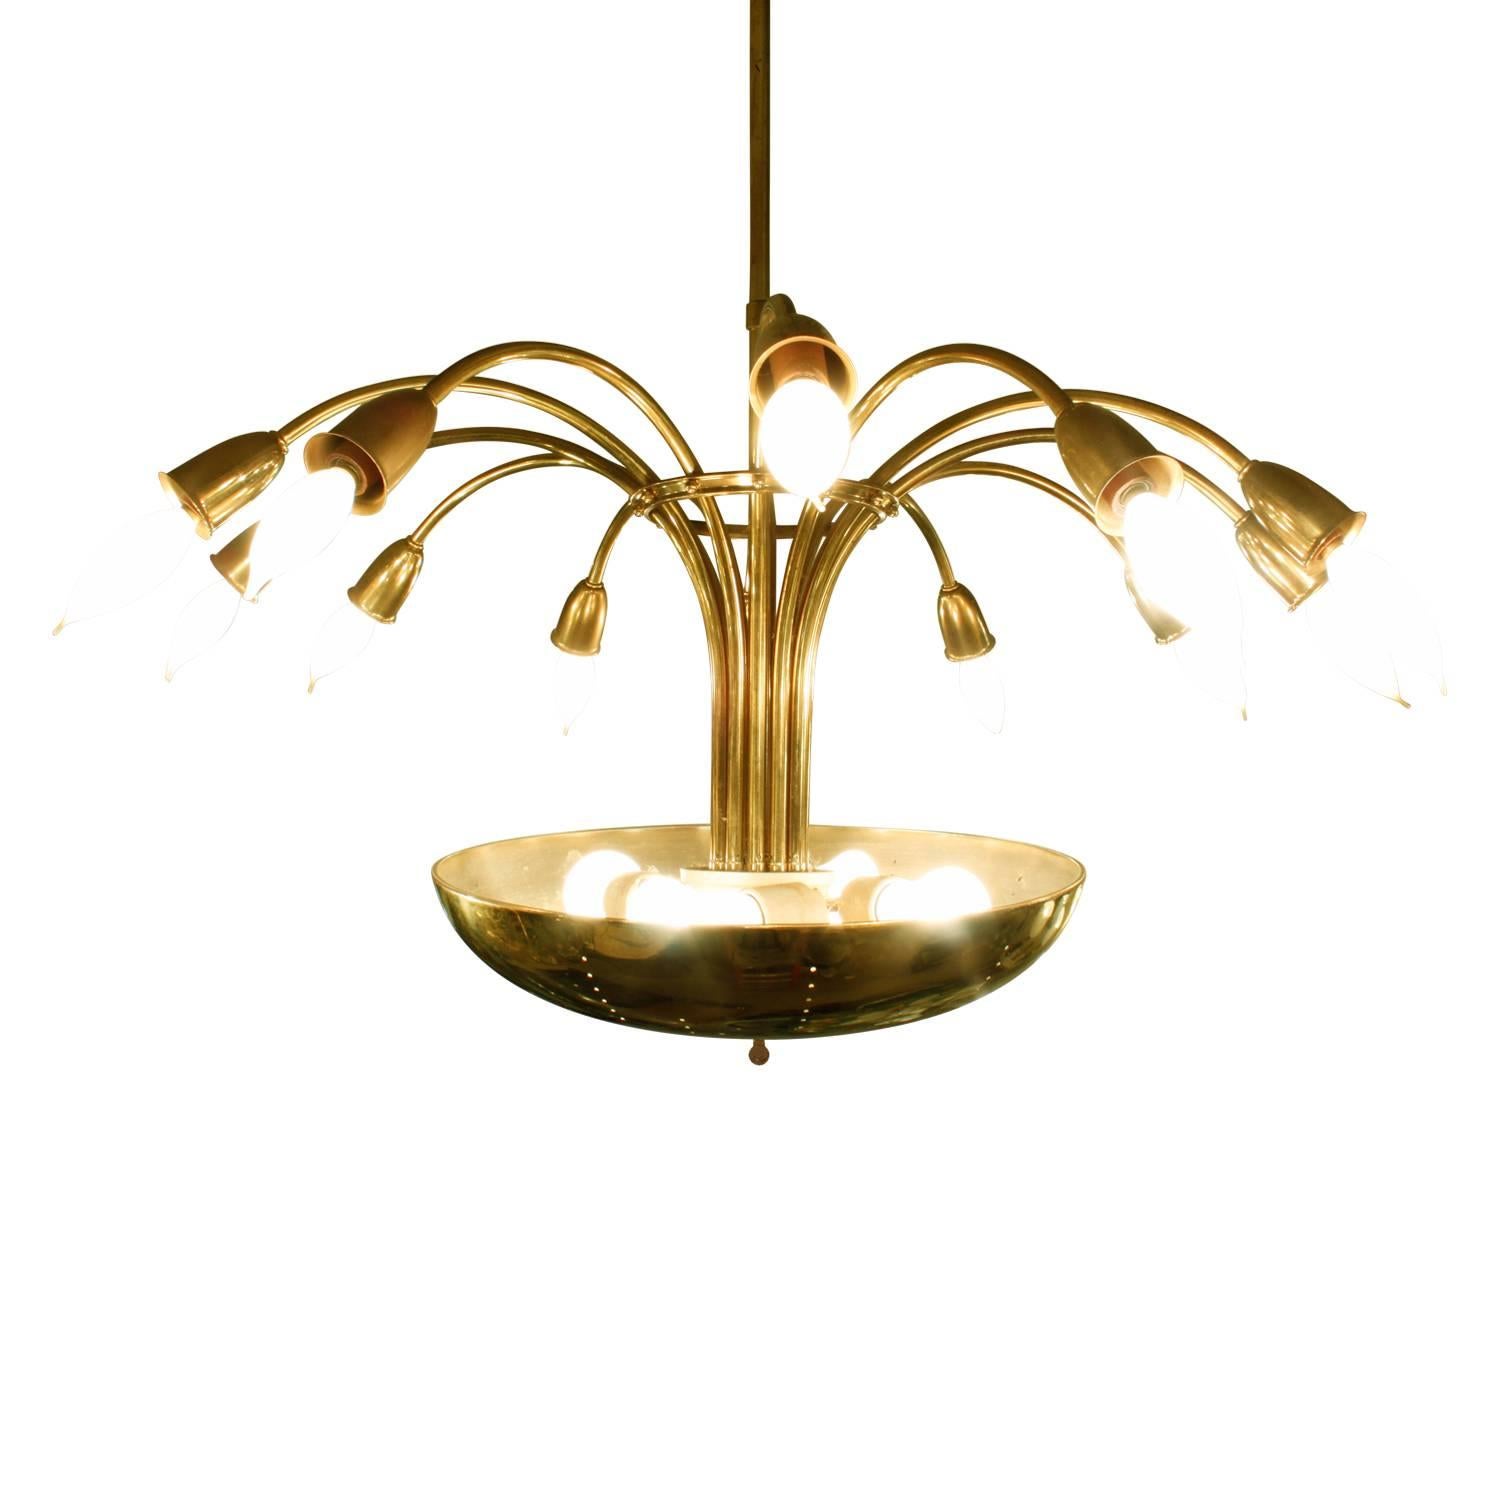 Elegant chandelier in brass with curved arms and perforated bottom, Italian, 1950s.